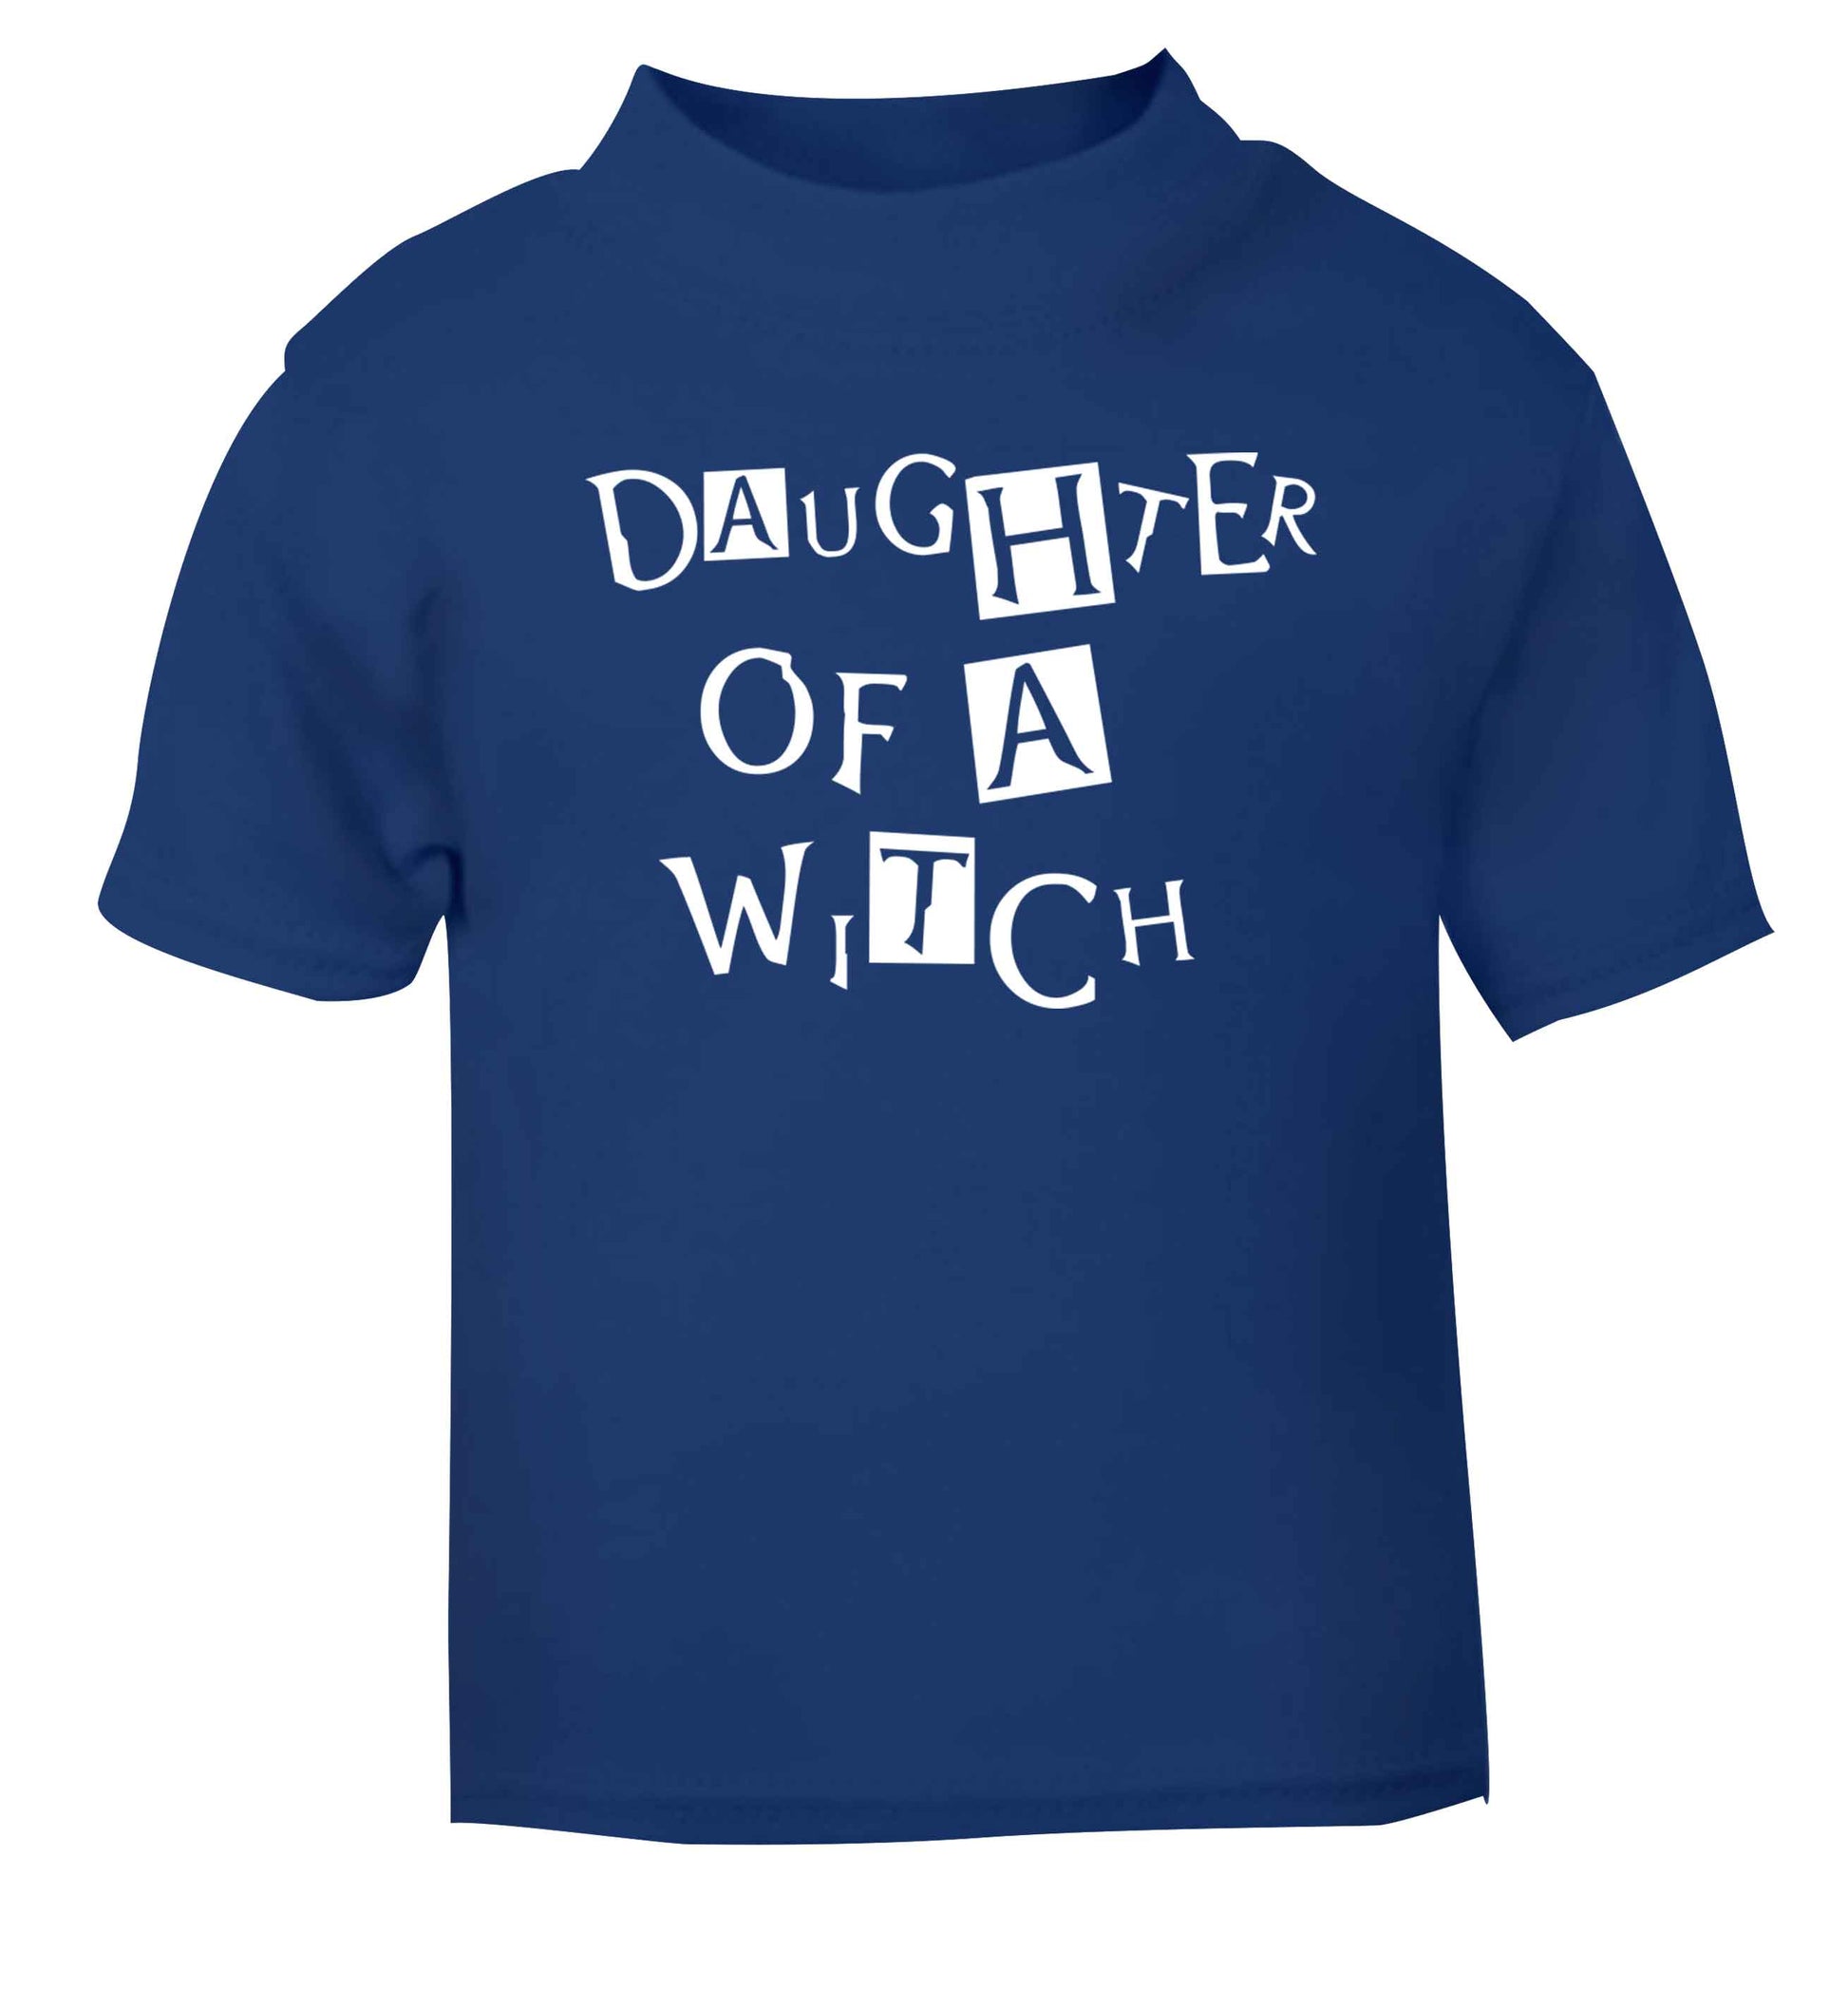 Daughter of a witch blue baby toddler Tshirt 2 Years